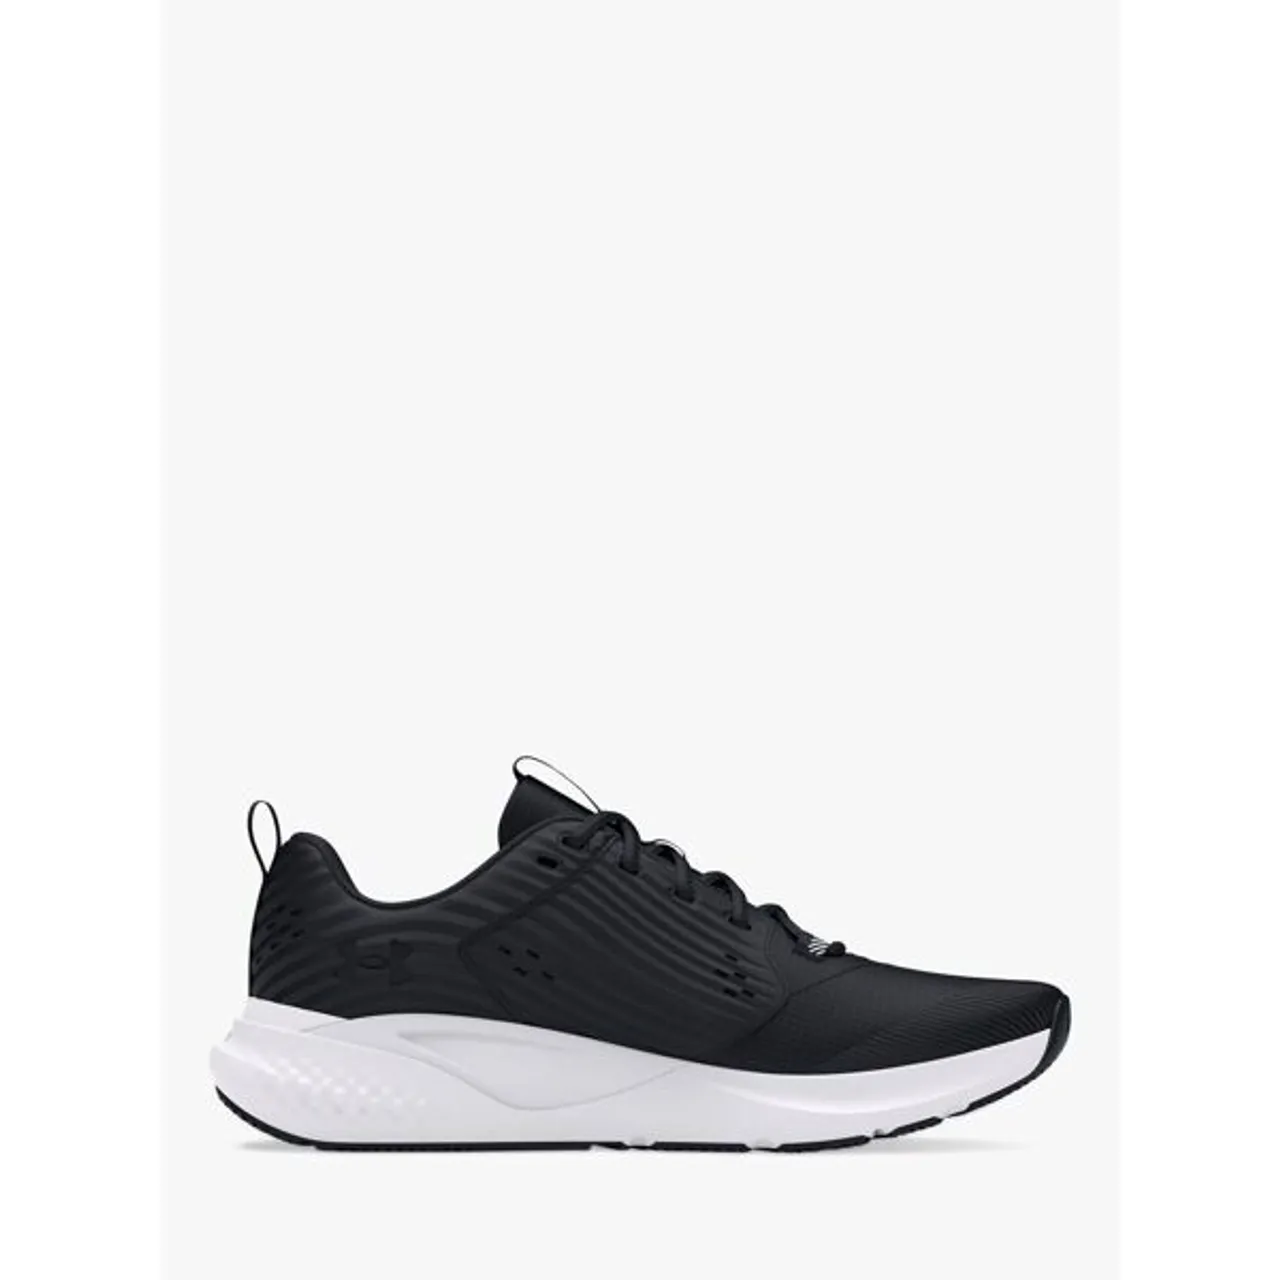 Under Armour Charged Men's Running Shoes, Black/White - Black / White - Male